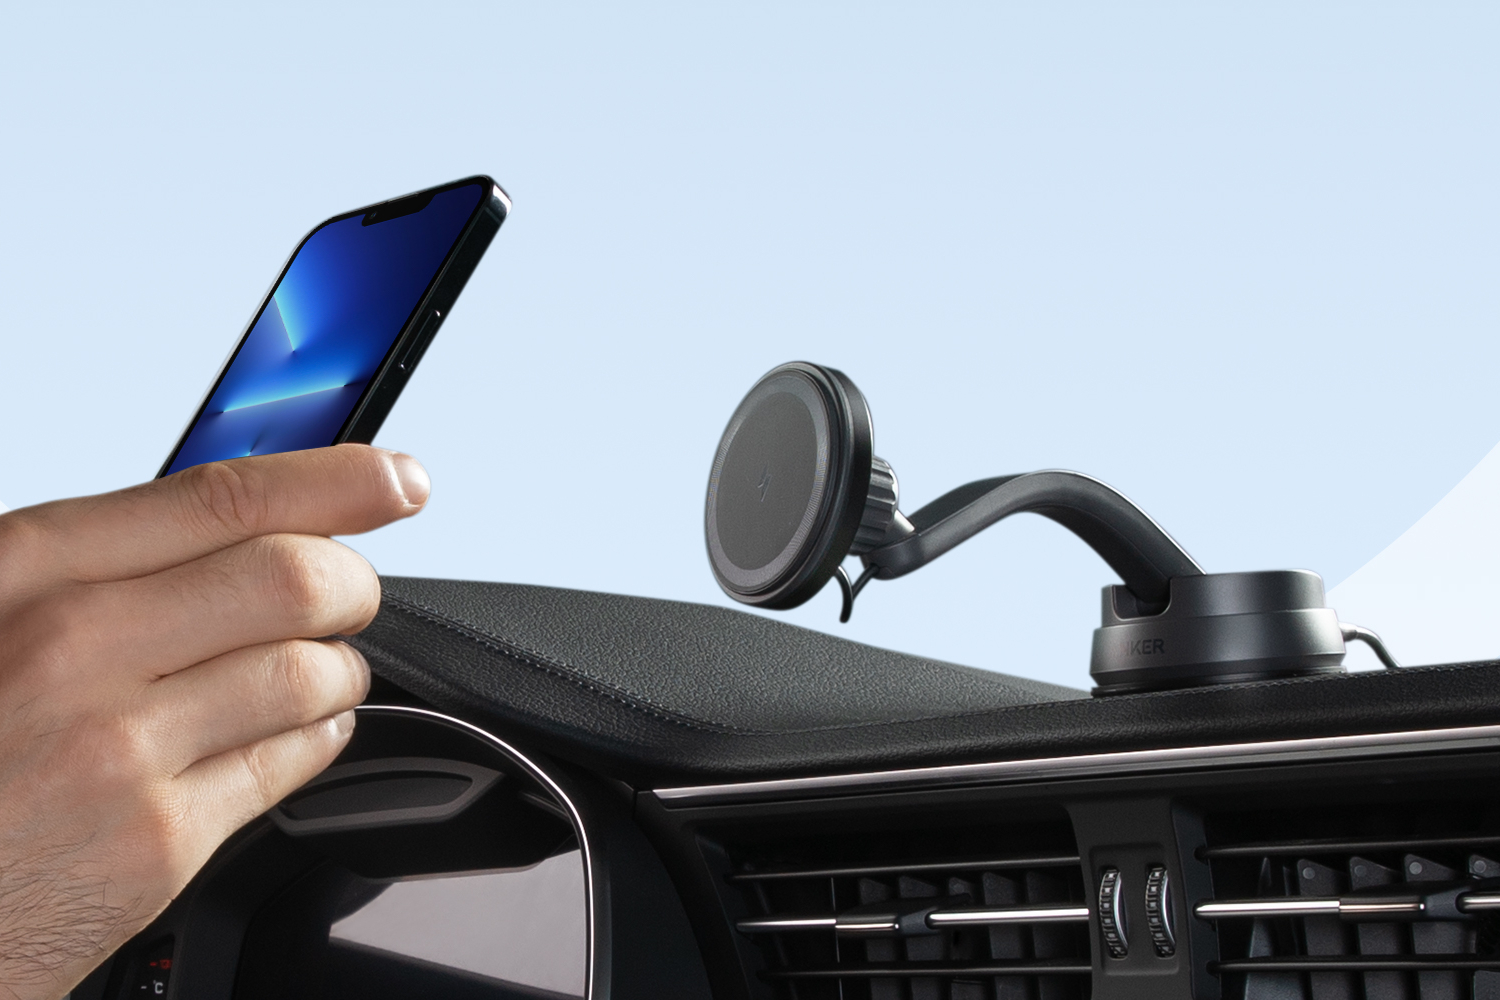 Anker MagGo MagSafe Car Mount hands-on review - 9to5Toys